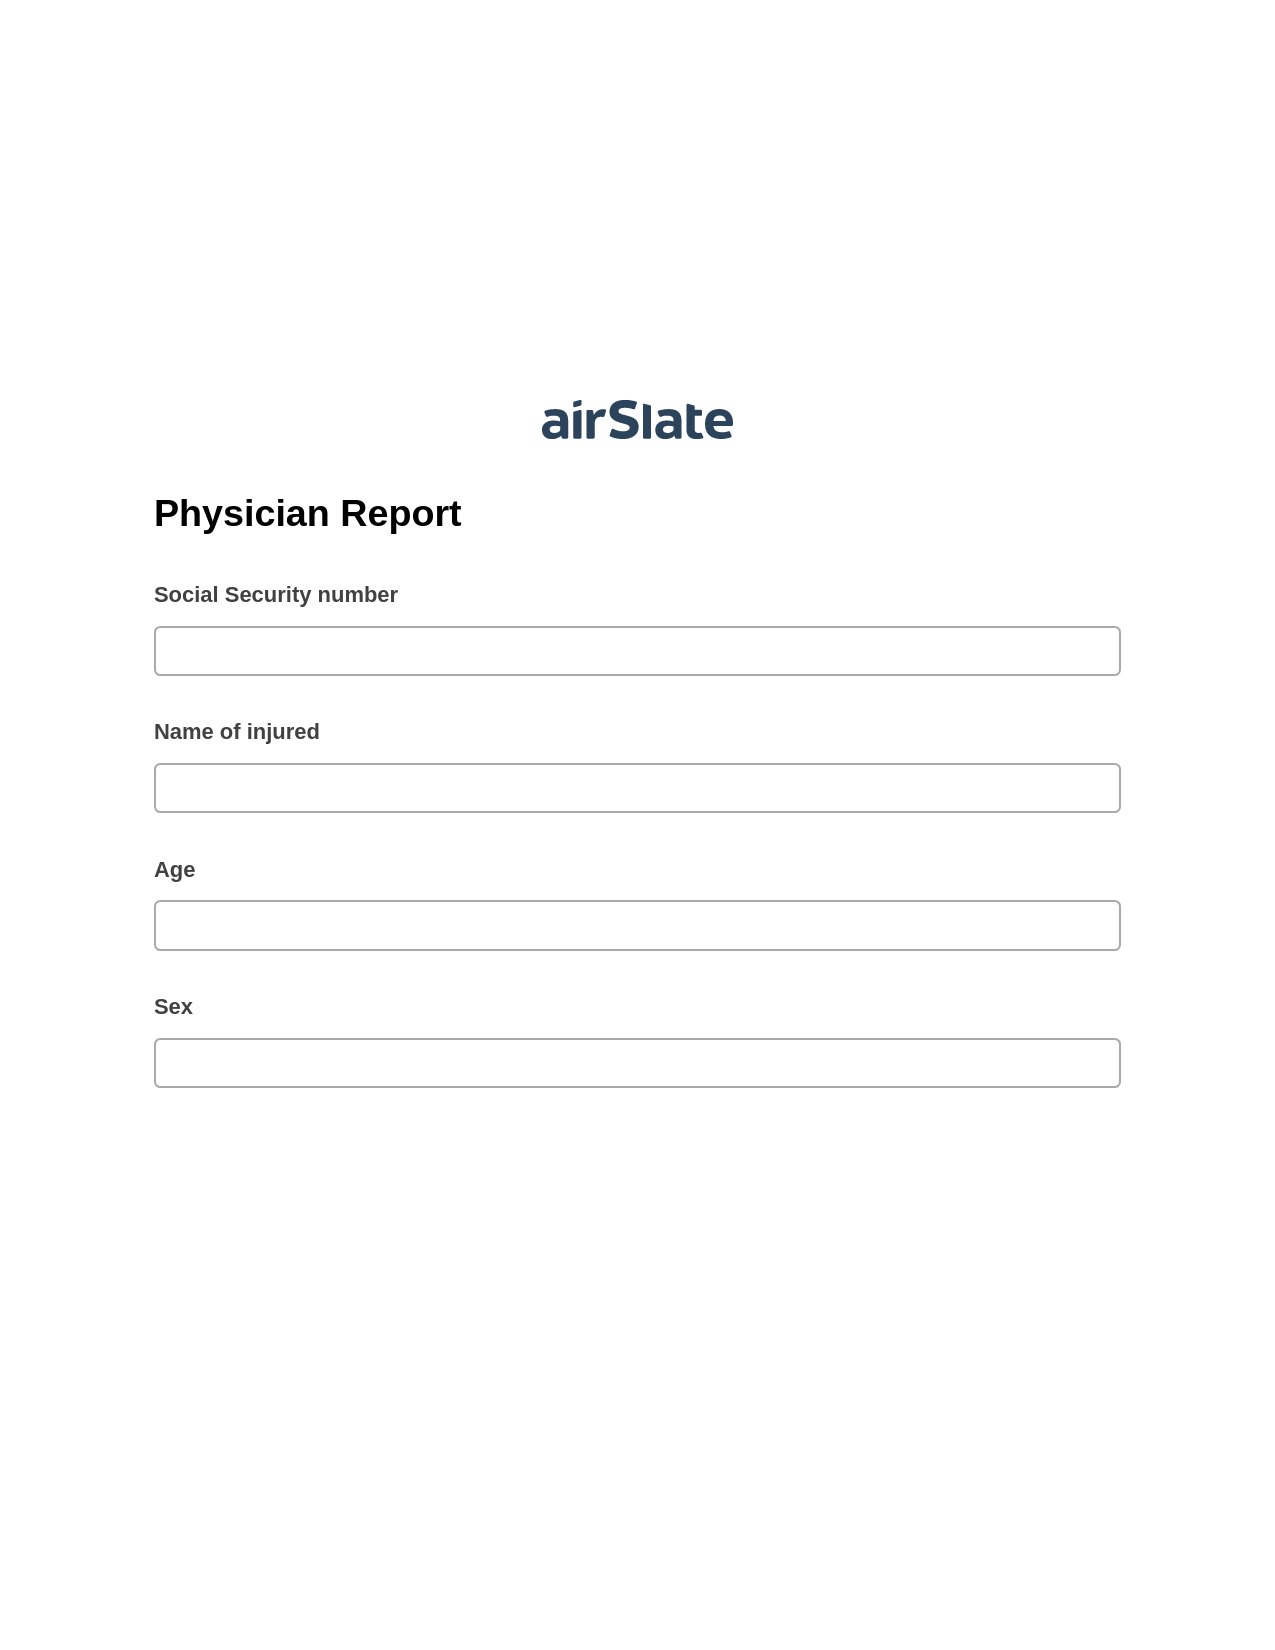 Physician Report Pre-fill from MS Dynamics 365 Records, Invoke Salesforce Process Bot, Export to Google Sheet Bot